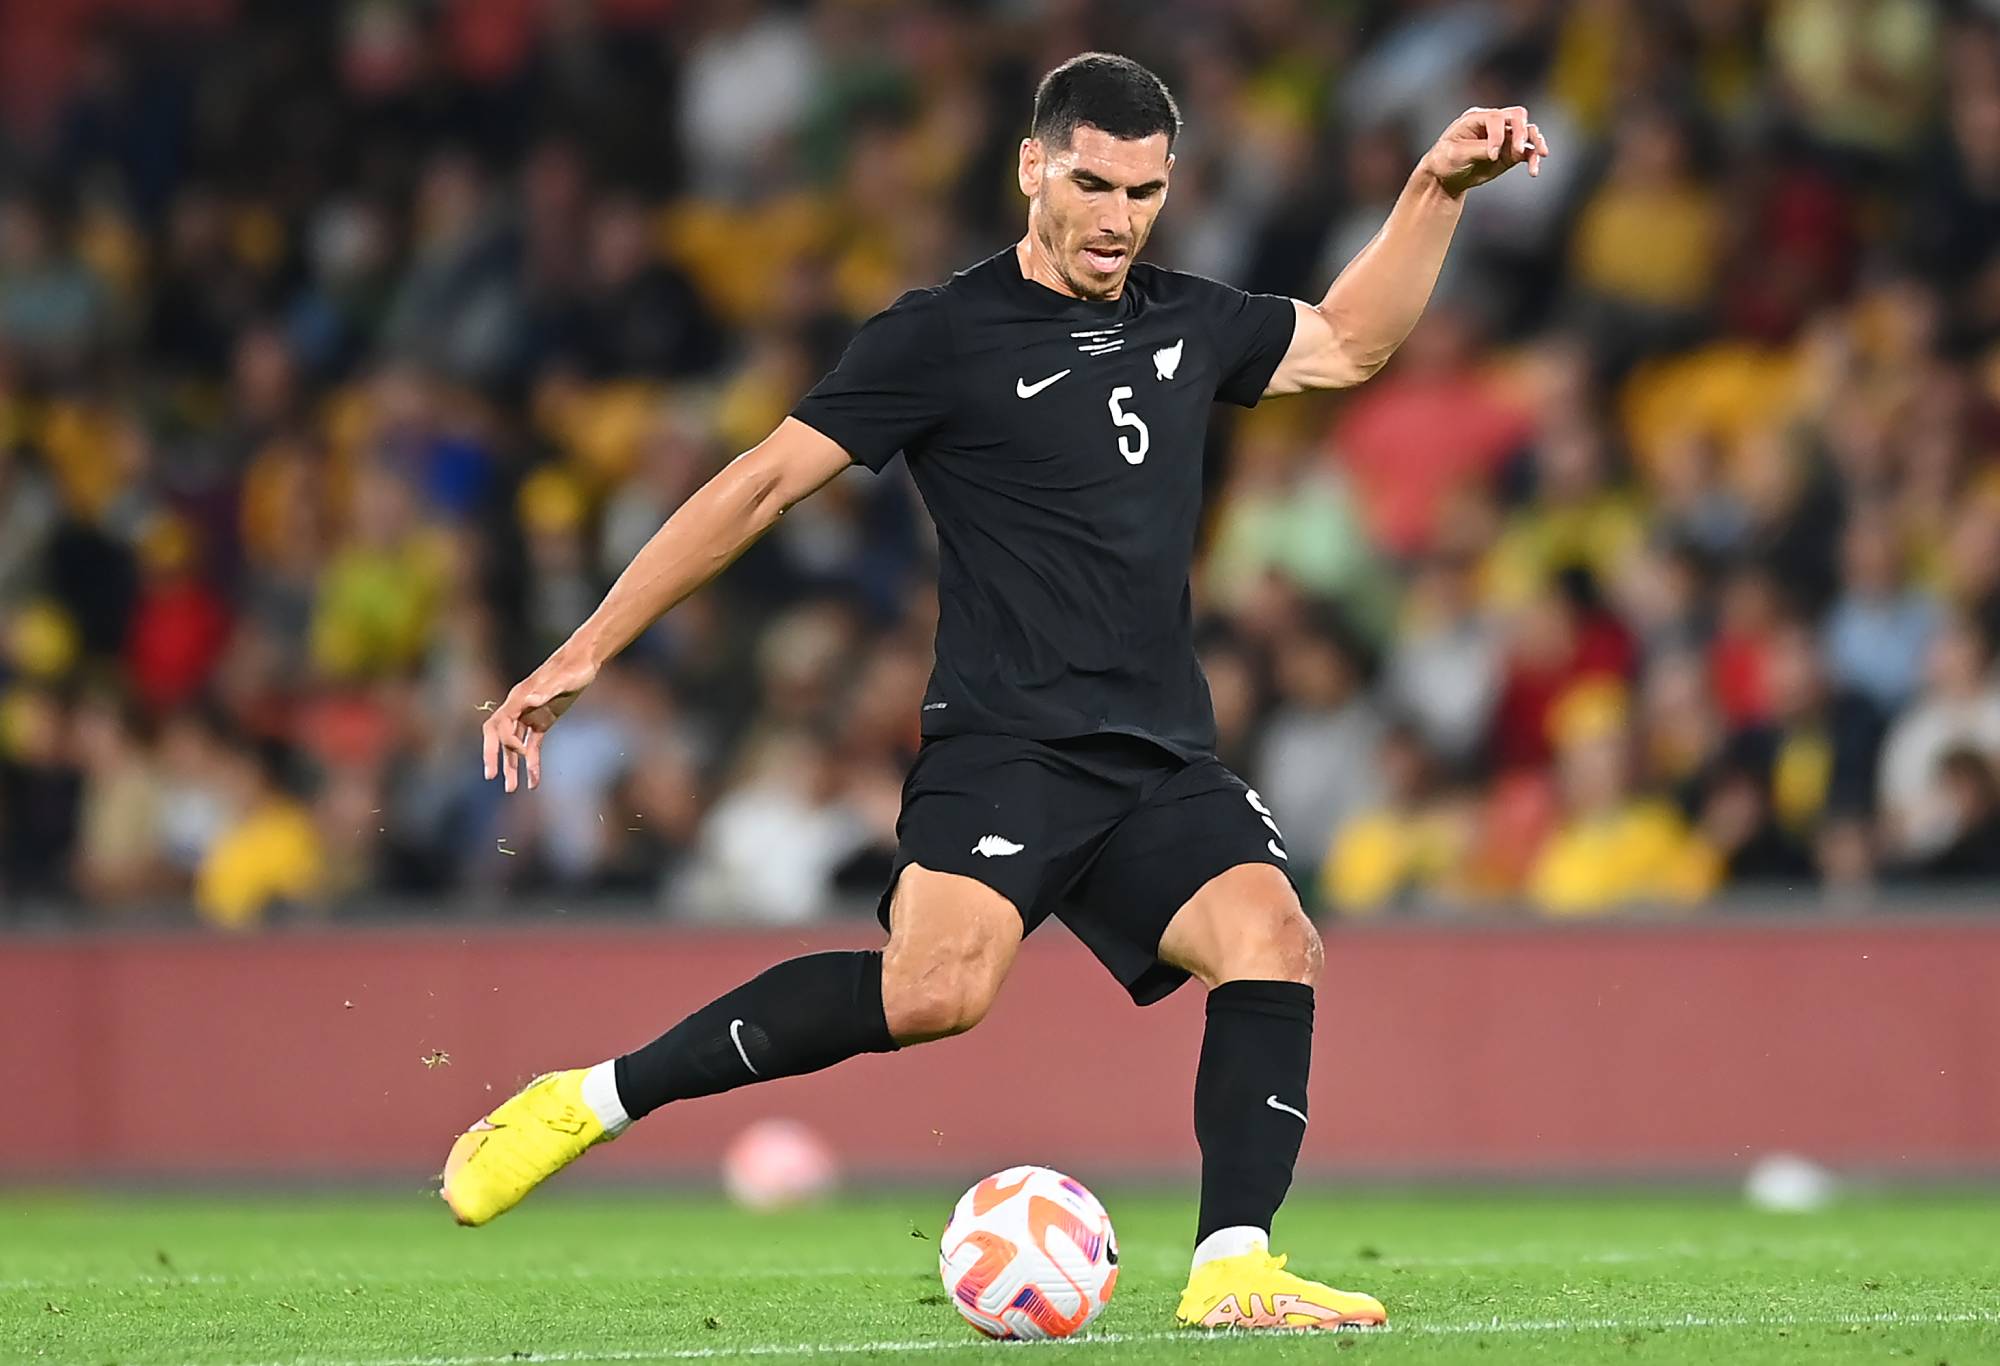 BRISBANE, AUSTRALIA - SEPTEMBER 22: Michael Boxall of New Zealand in action during the International Friendly match between the Australia Socceroos and the New Zealand All Whites at Suncorp Stadium on September 22, 2022 in Brisbane, Australia. (Photo by Albert Perez/Getty Images)